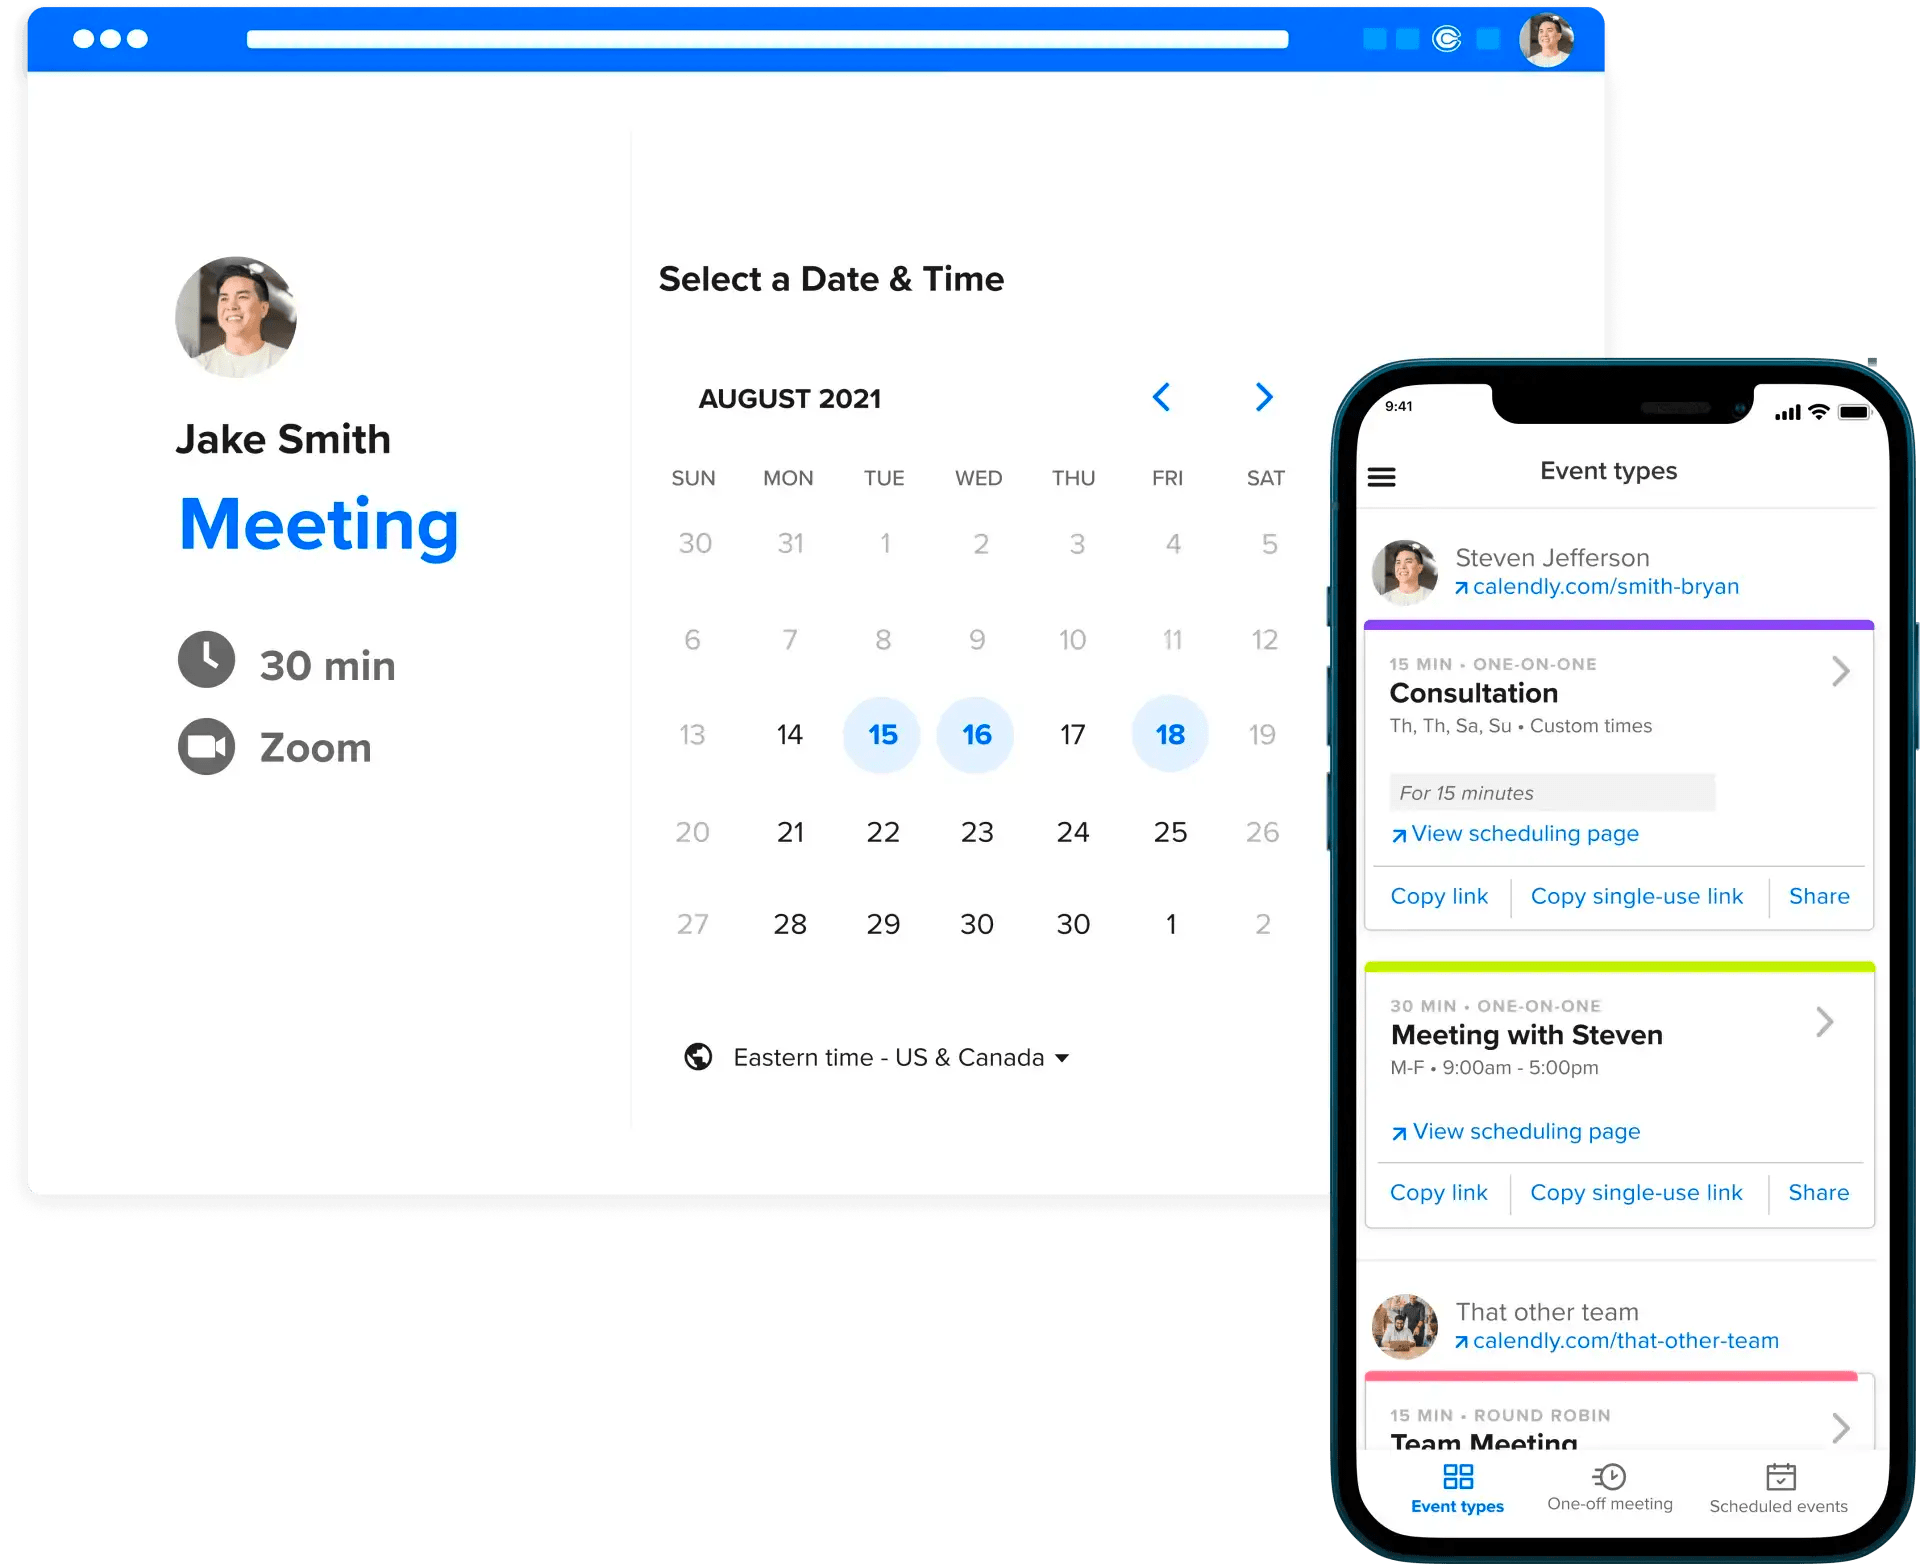 Two Calendly screenshots. The first is the screen to "Select a Date and Time" for a meeting on desktop. The second shows the "Event types" screen on the mobile app, including events called "Consultation", "Meeting with Steven", and "Team Meeting"